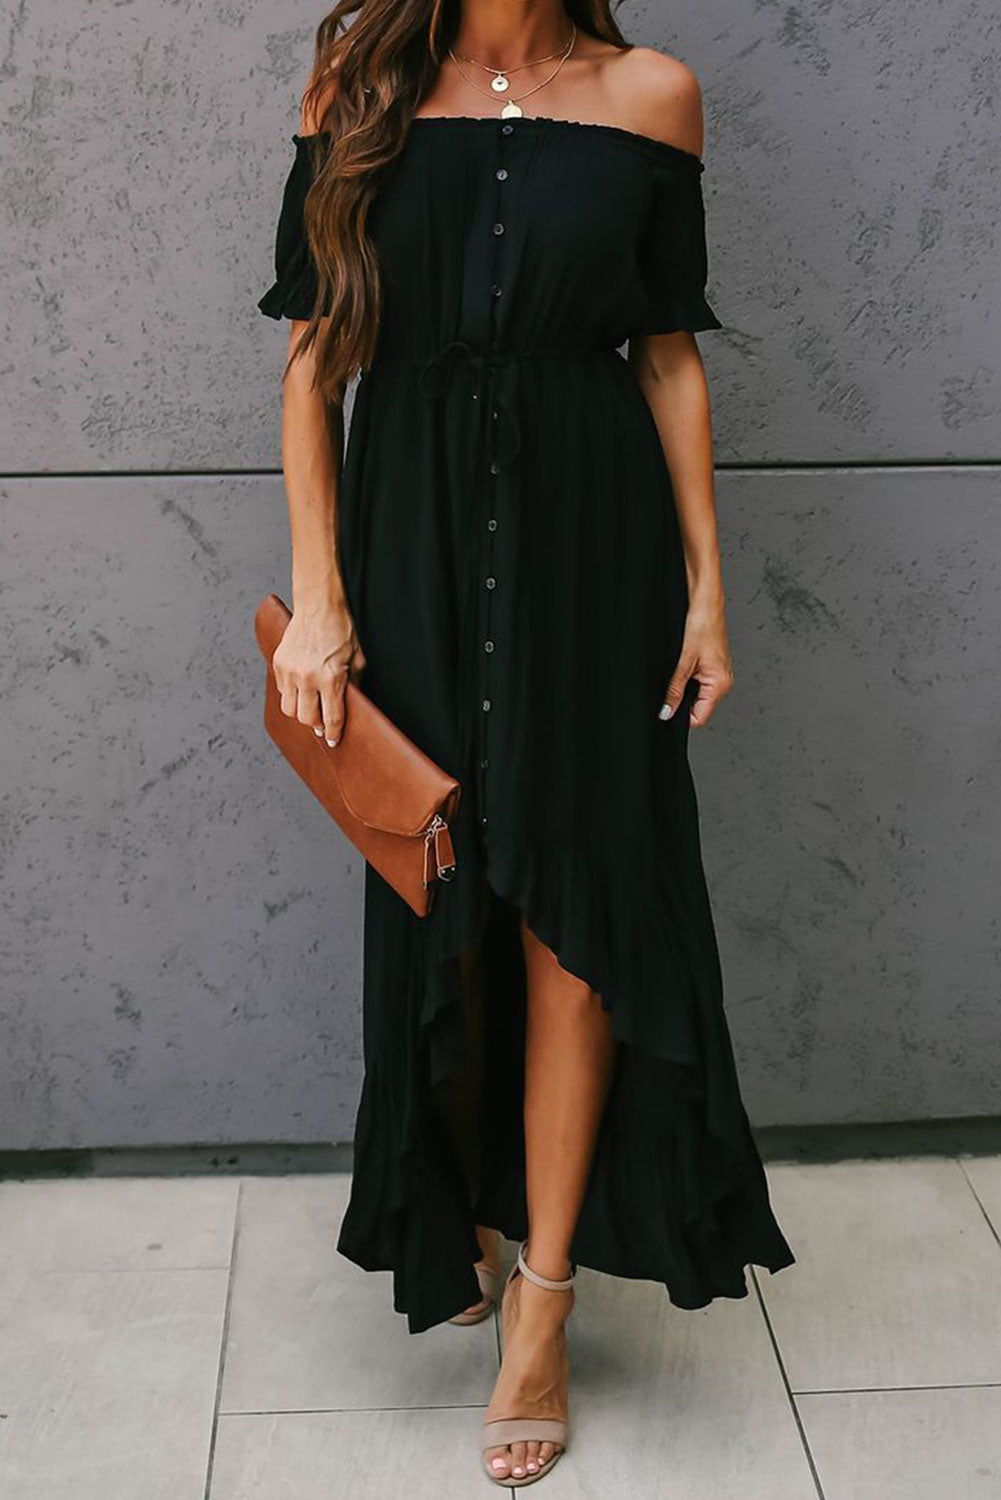 Black Glaze High Low Off The Shoulder Maxi Dress-Maxi Dresses-Black-(US 4-6)S-Free Shipping at meselling99